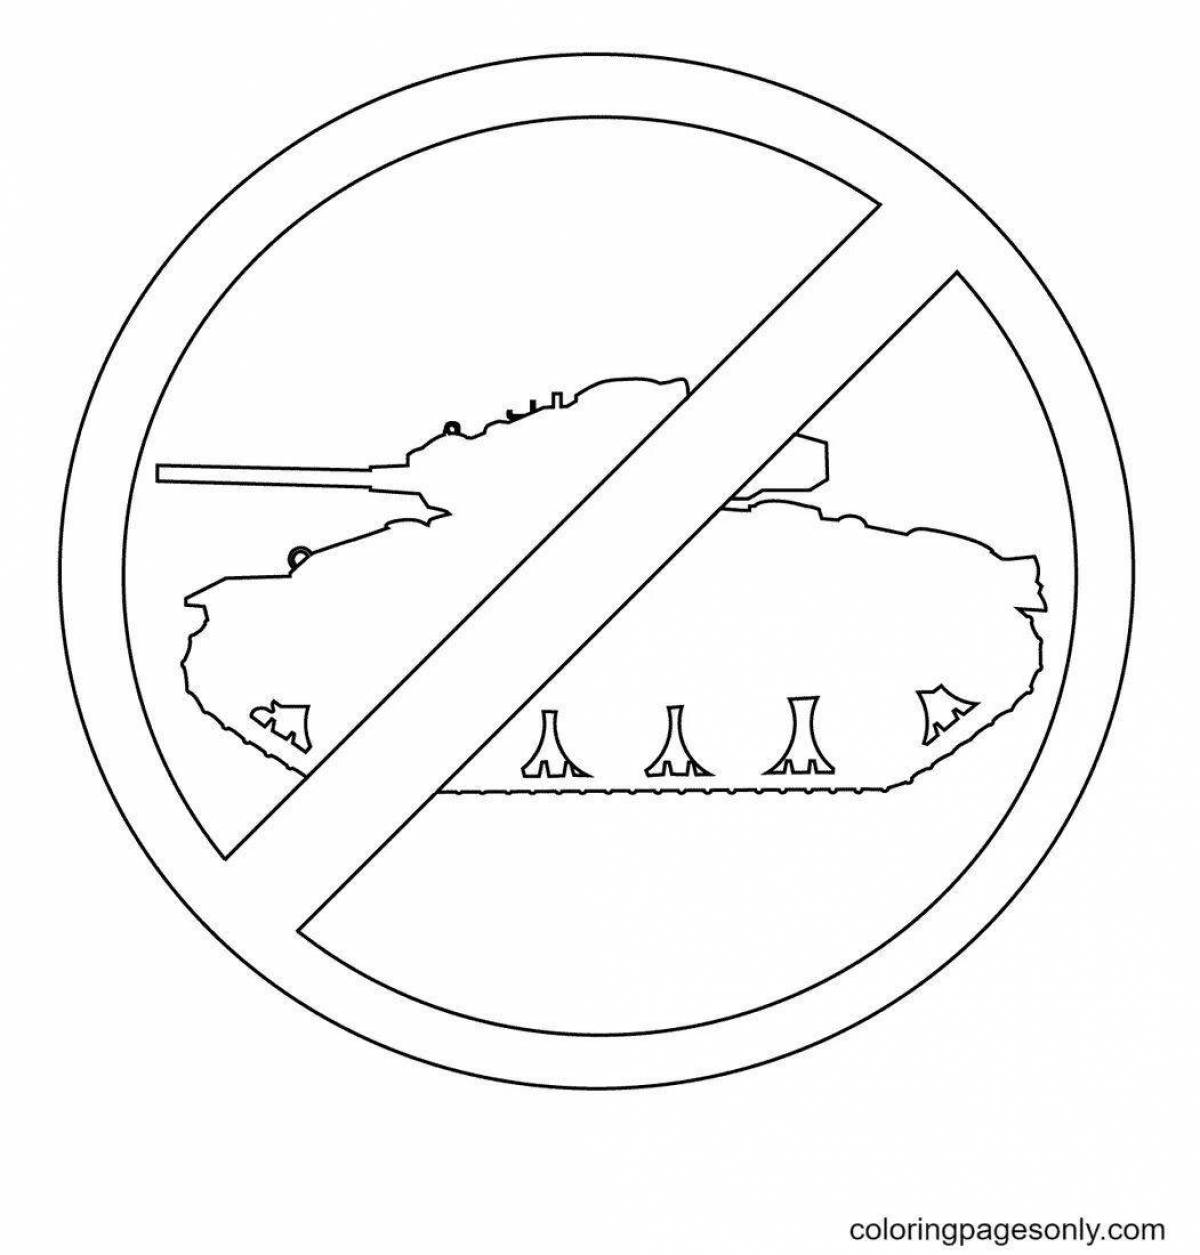 Coloring pages environment signs for kids